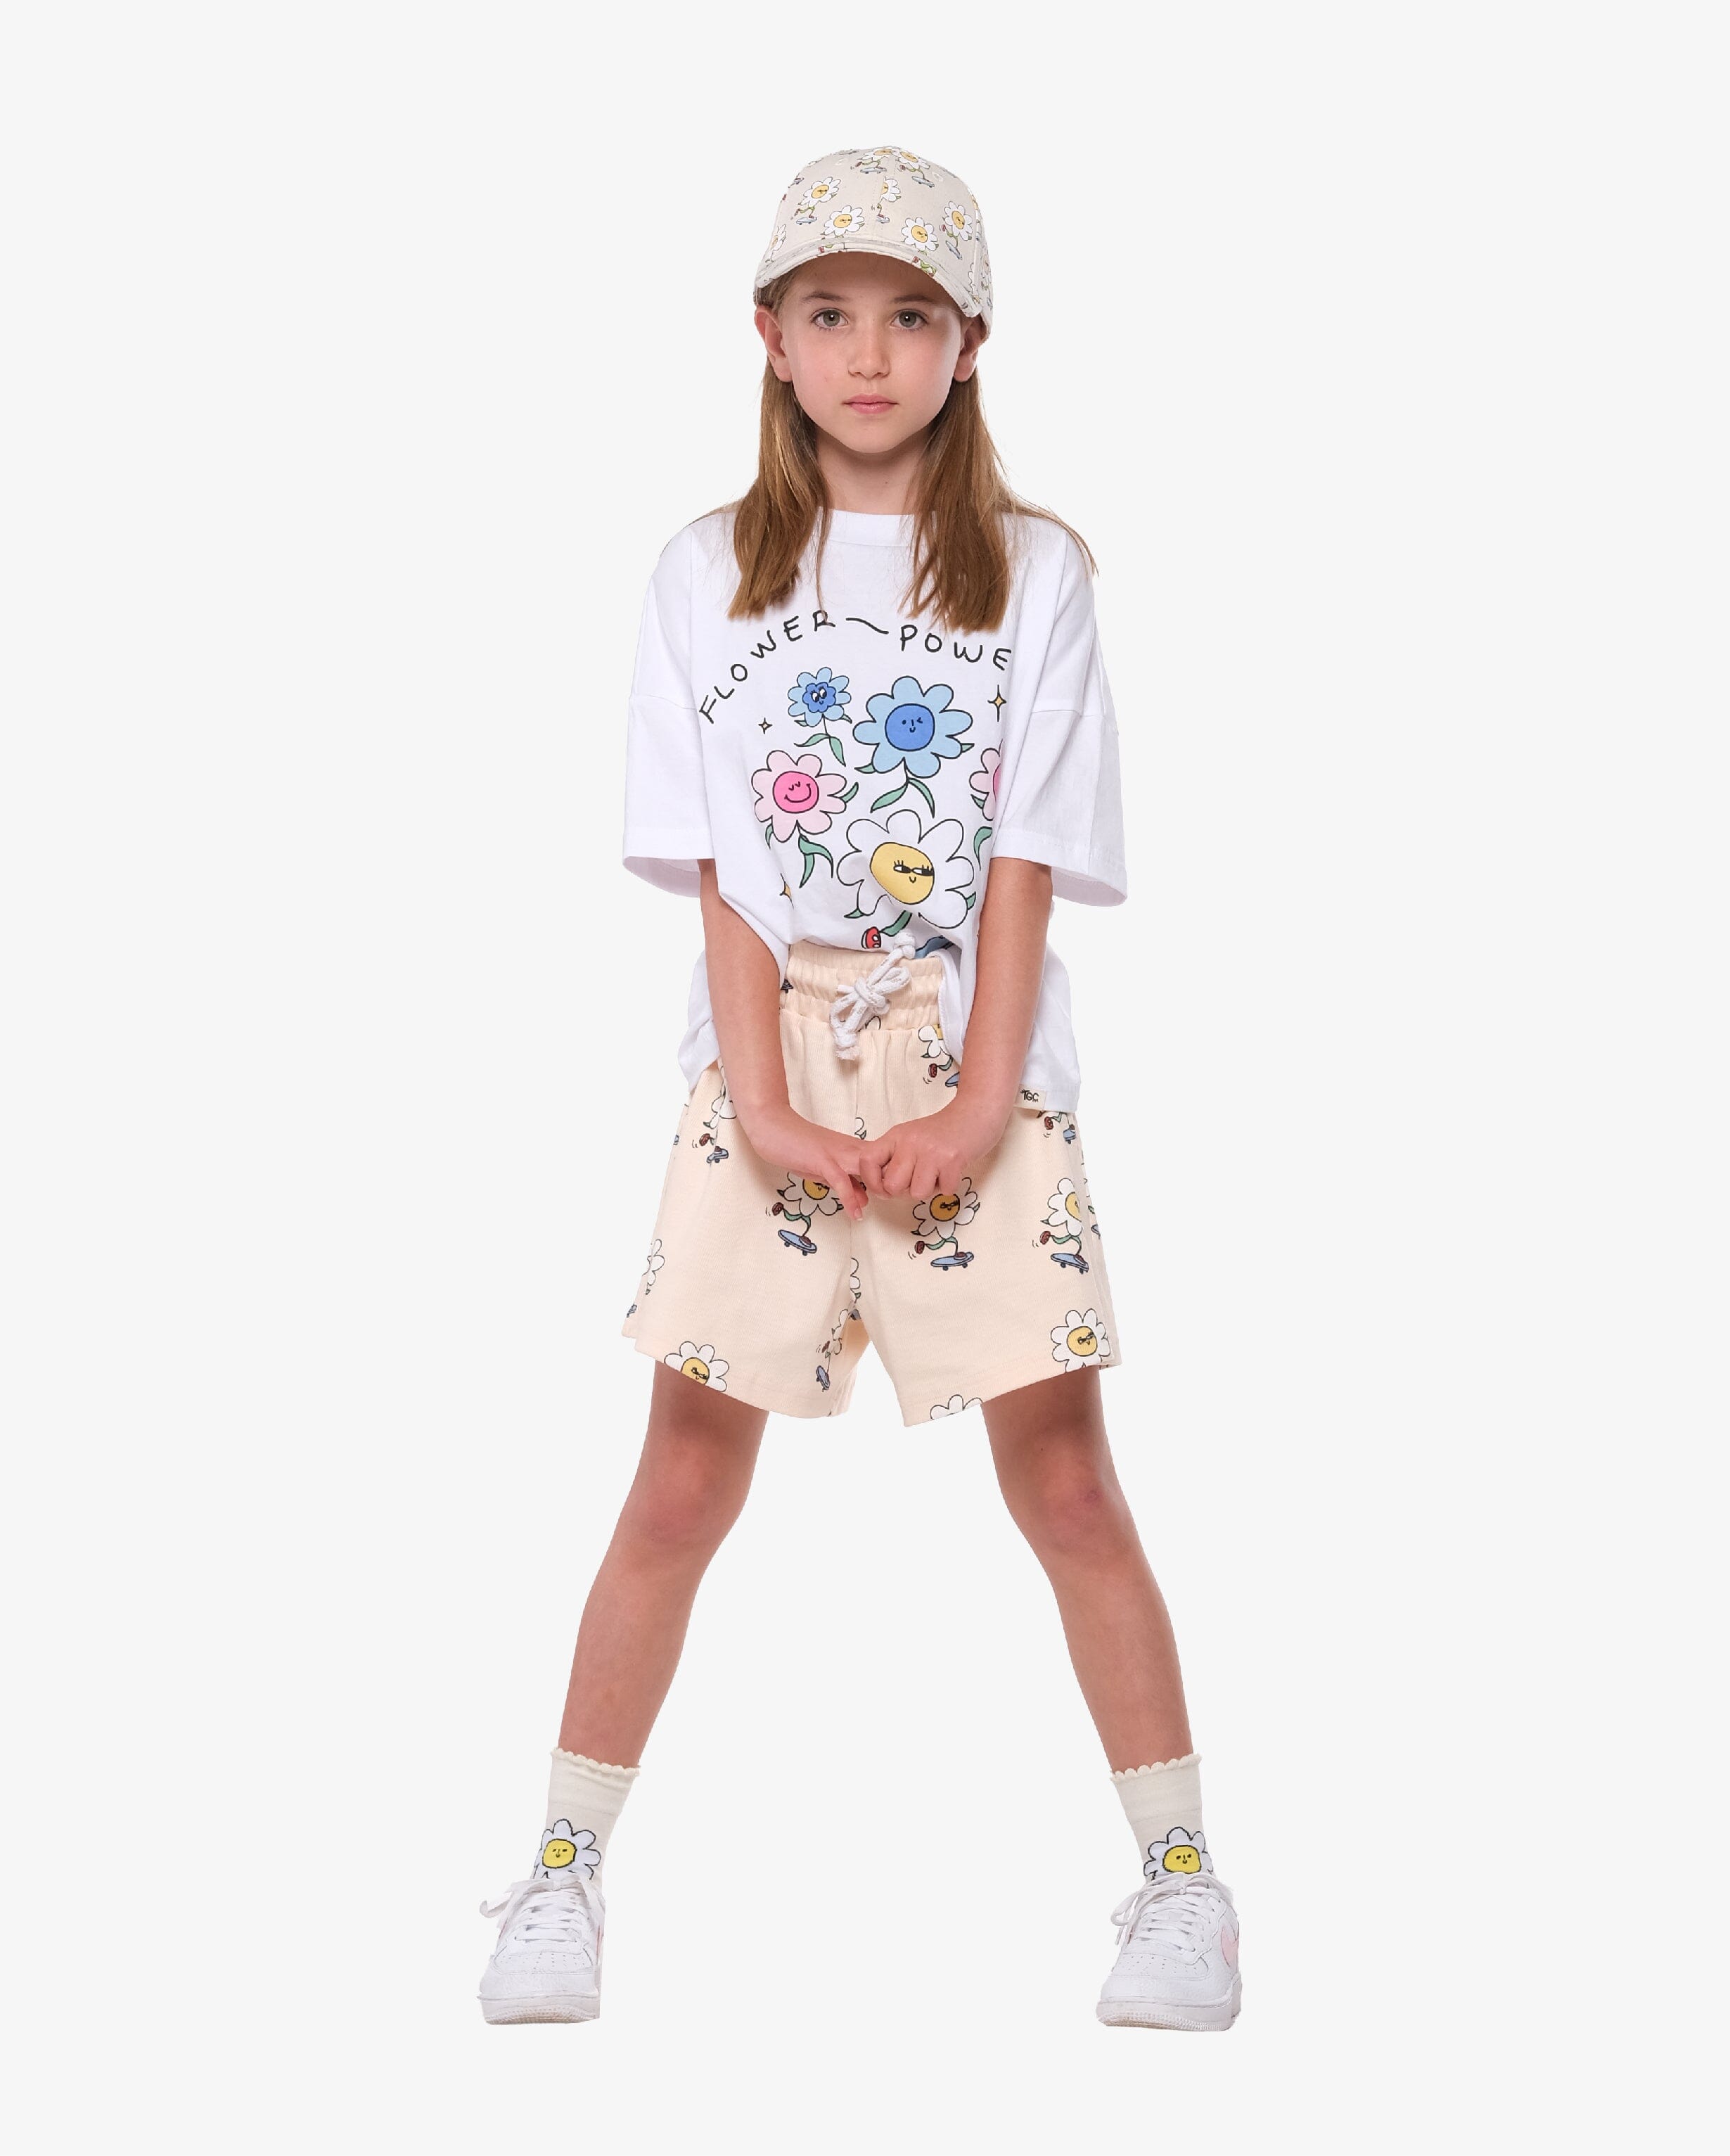 THE GIRL CLUB | Daisy Skater On Repeat Lounge Shorts - Cream Girls The Girl Club